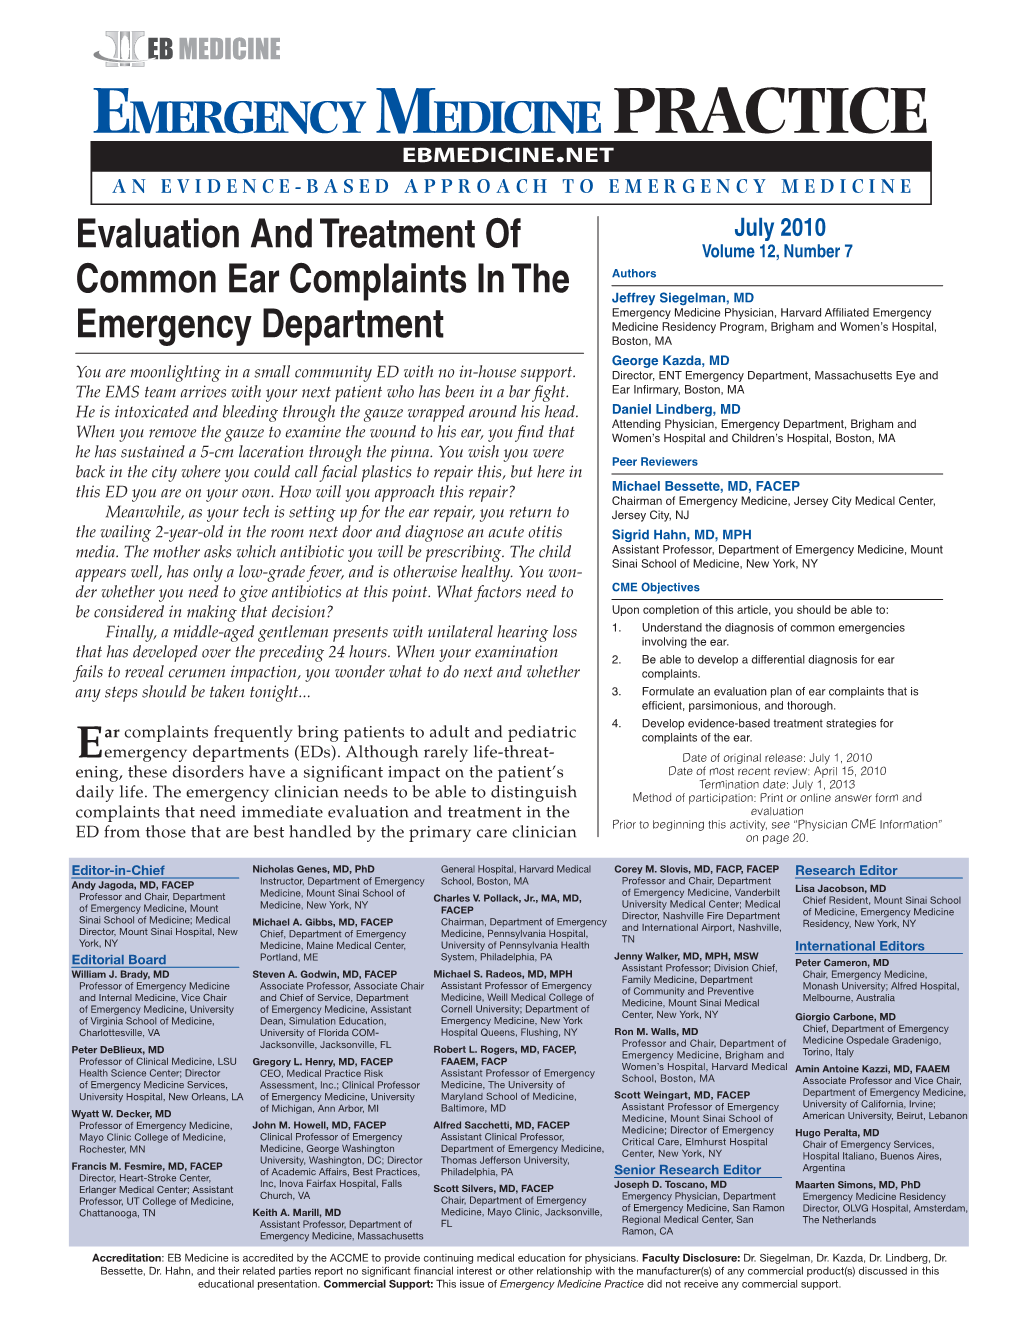 Evaluation and Treatment of Common Ear Complaints in the Emergency Department Siegelman J, Kazda G, Lindberg D